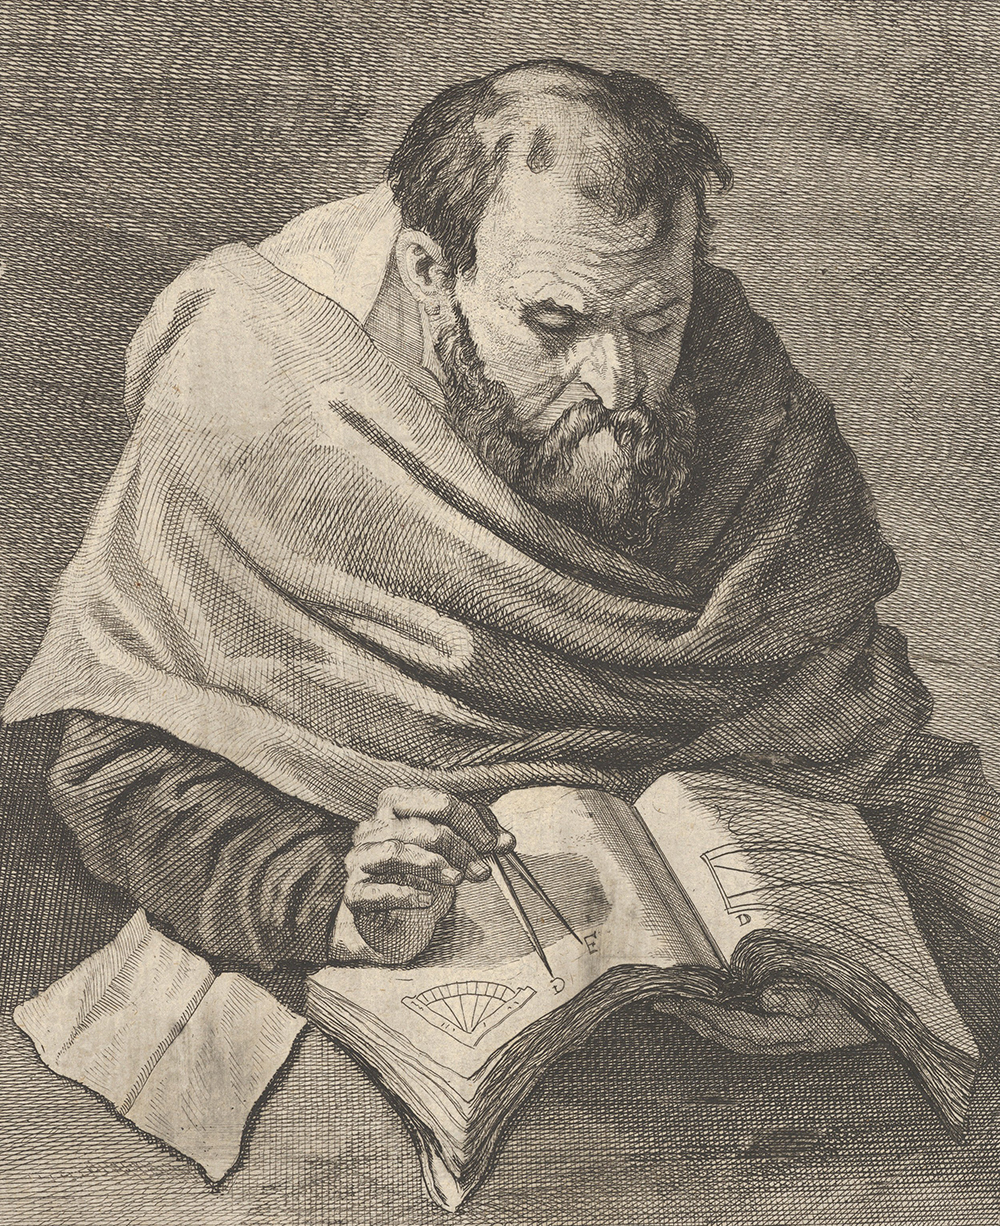 A mathematician seated at a table, working on mathematical equations, from a portfolio of prints of the Imperial Gallery of Paintings in Vienna, by Anton Joseph von Prenner, 1728. The Metropolitan Museum of Art, Harris Brisbane Dick Fund, 1953.